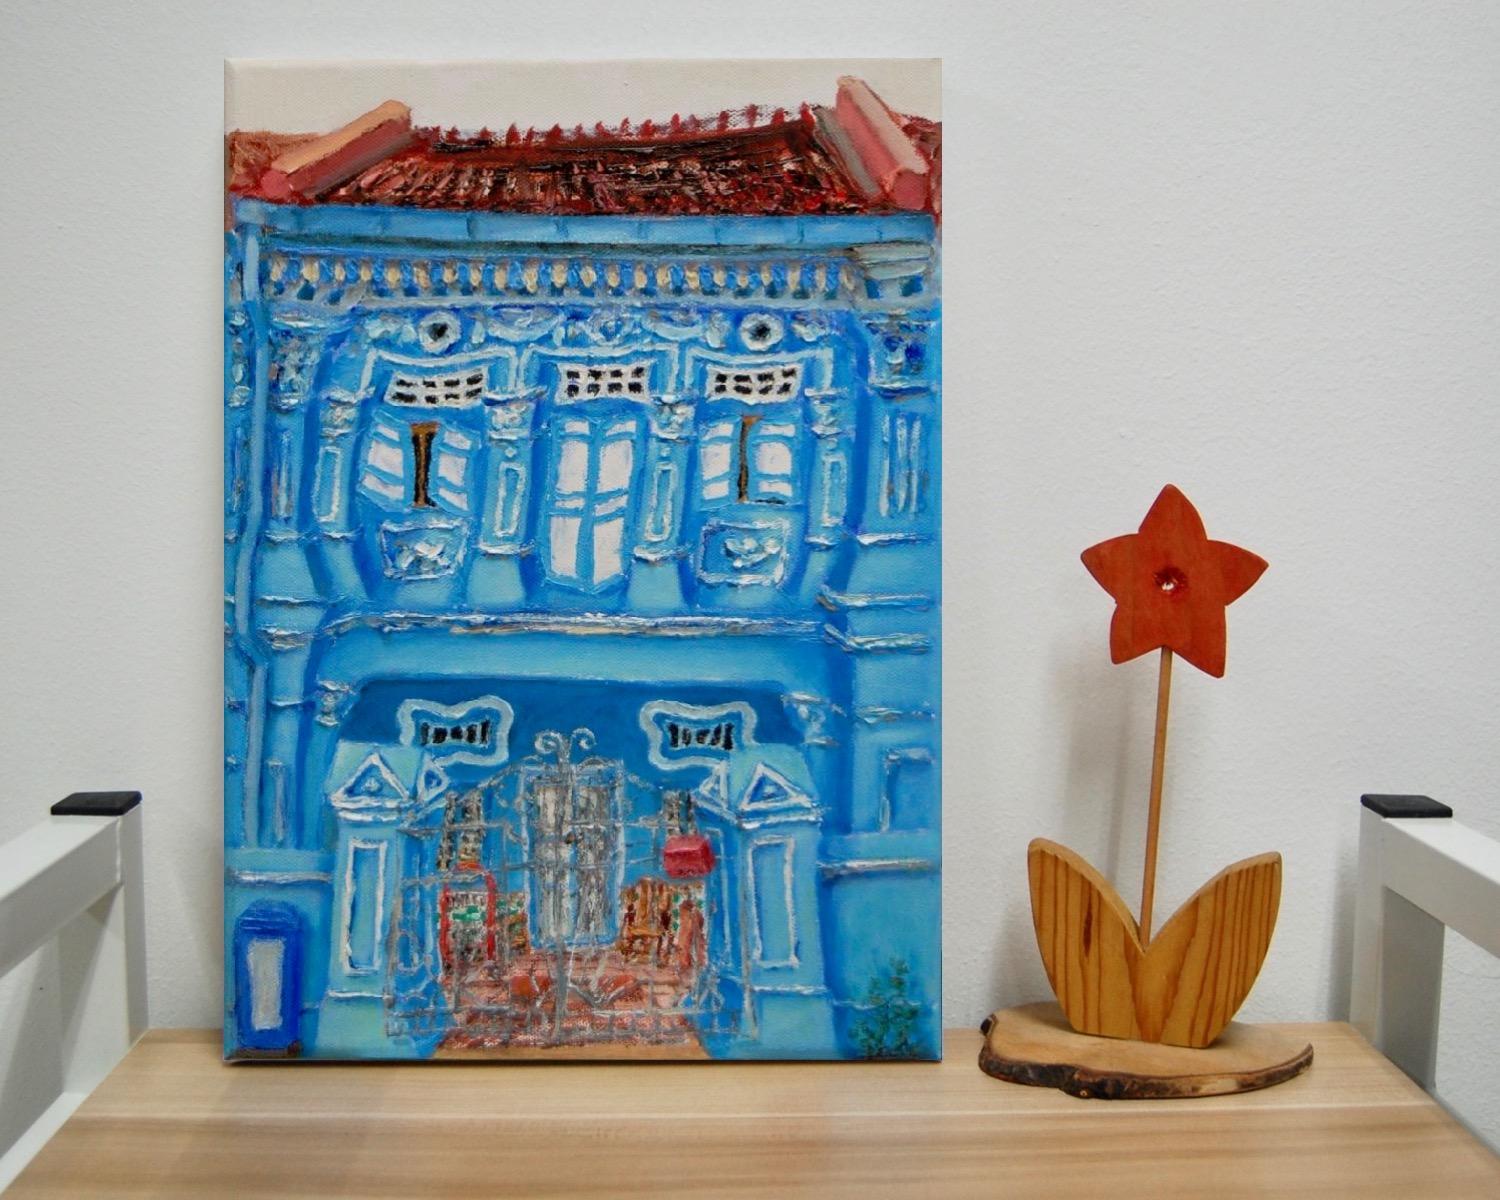 7 - Blue chinese peranakan shophouse oil painting at Singapore city most colorful picturesque street of colonial houses in vibrant pastels -PH7